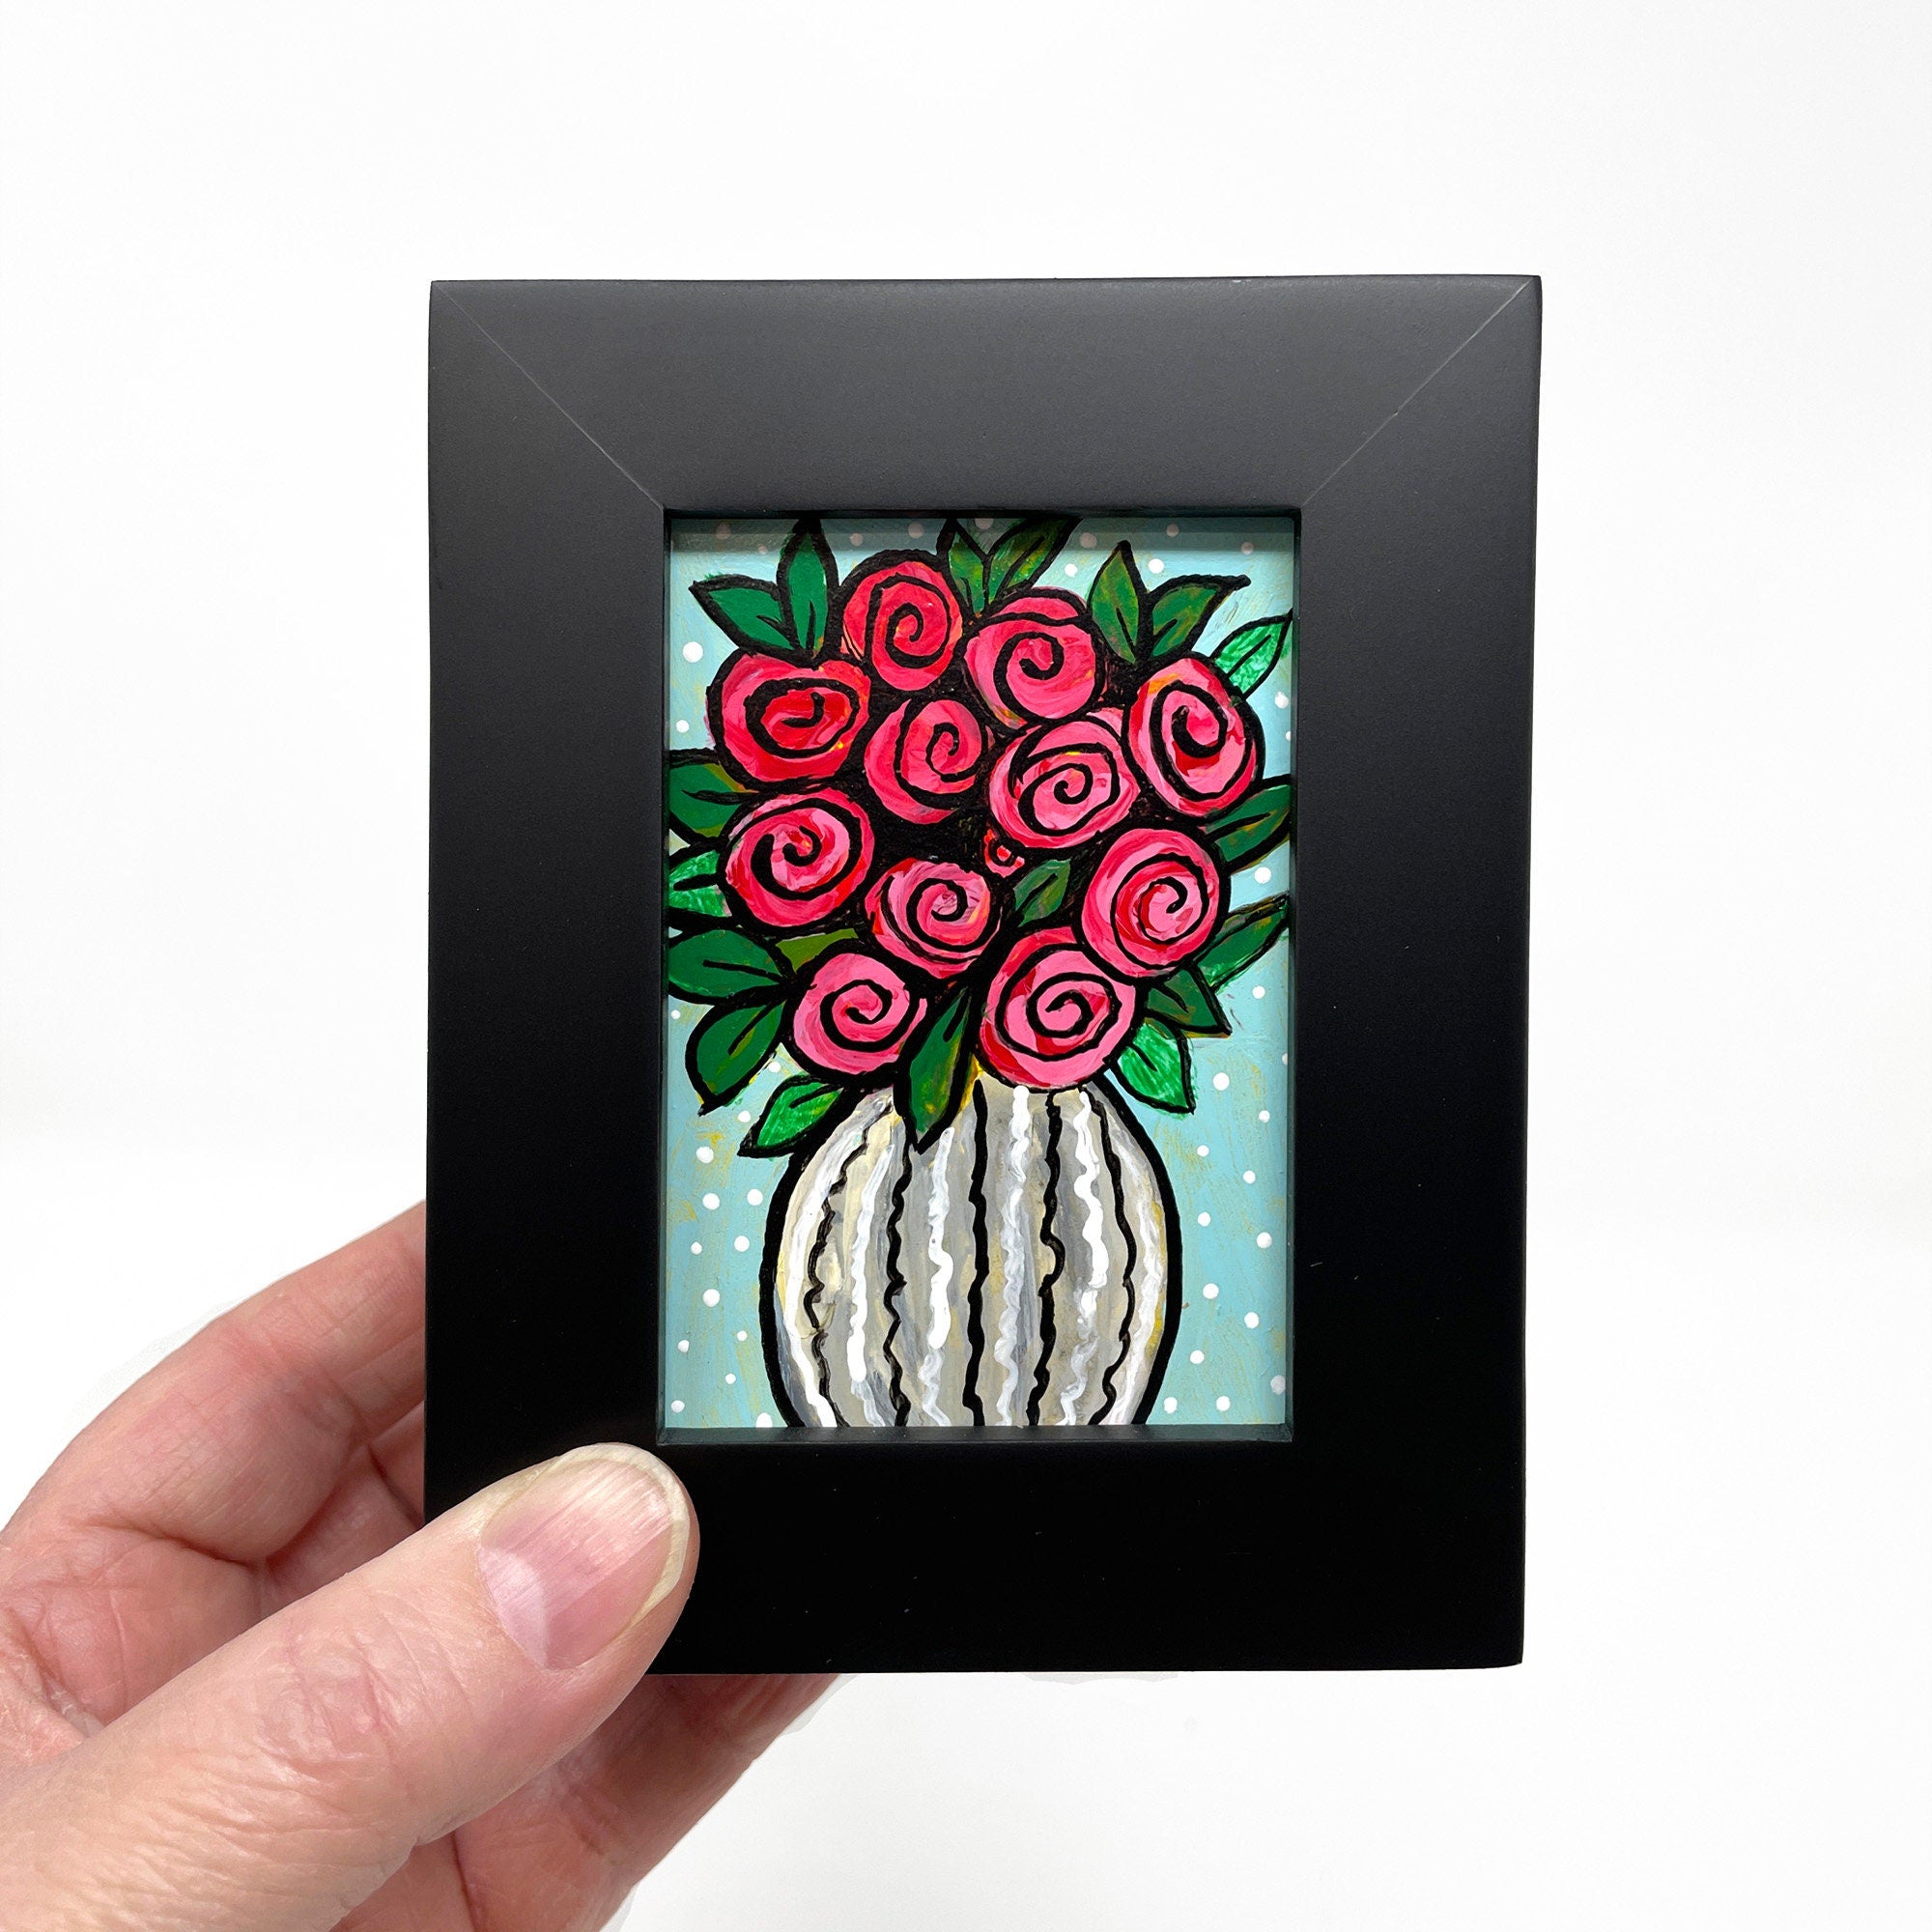 Hand holding Vase of Roses painting in black frame - White striped vase with red roses and green leaves. Light blue background with white polka dots.